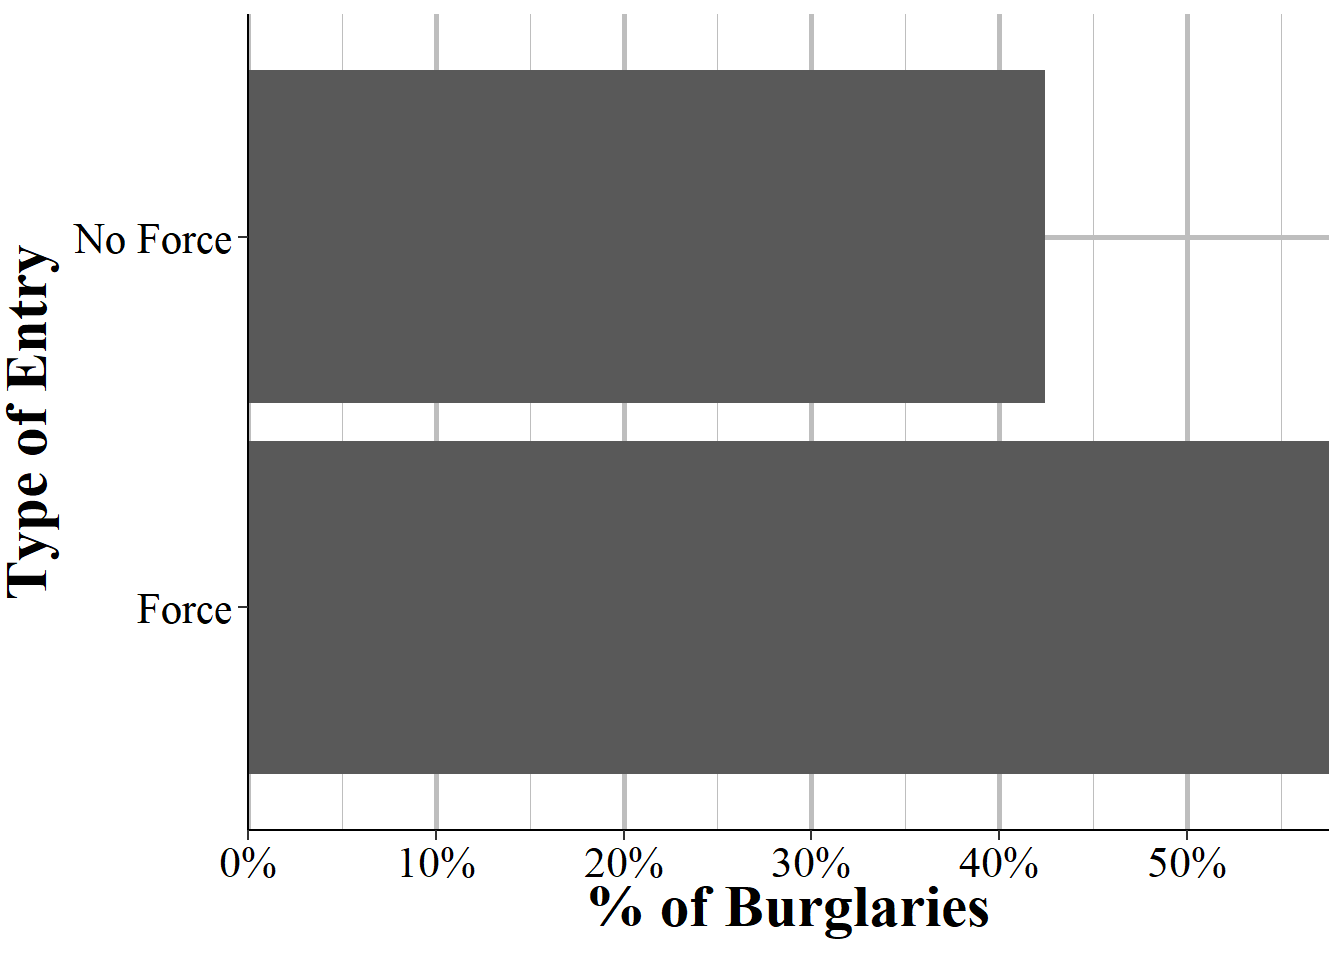 The percent of burglaries reported in 2019 where the burglary entered the structure forcibly or non-forcibly.